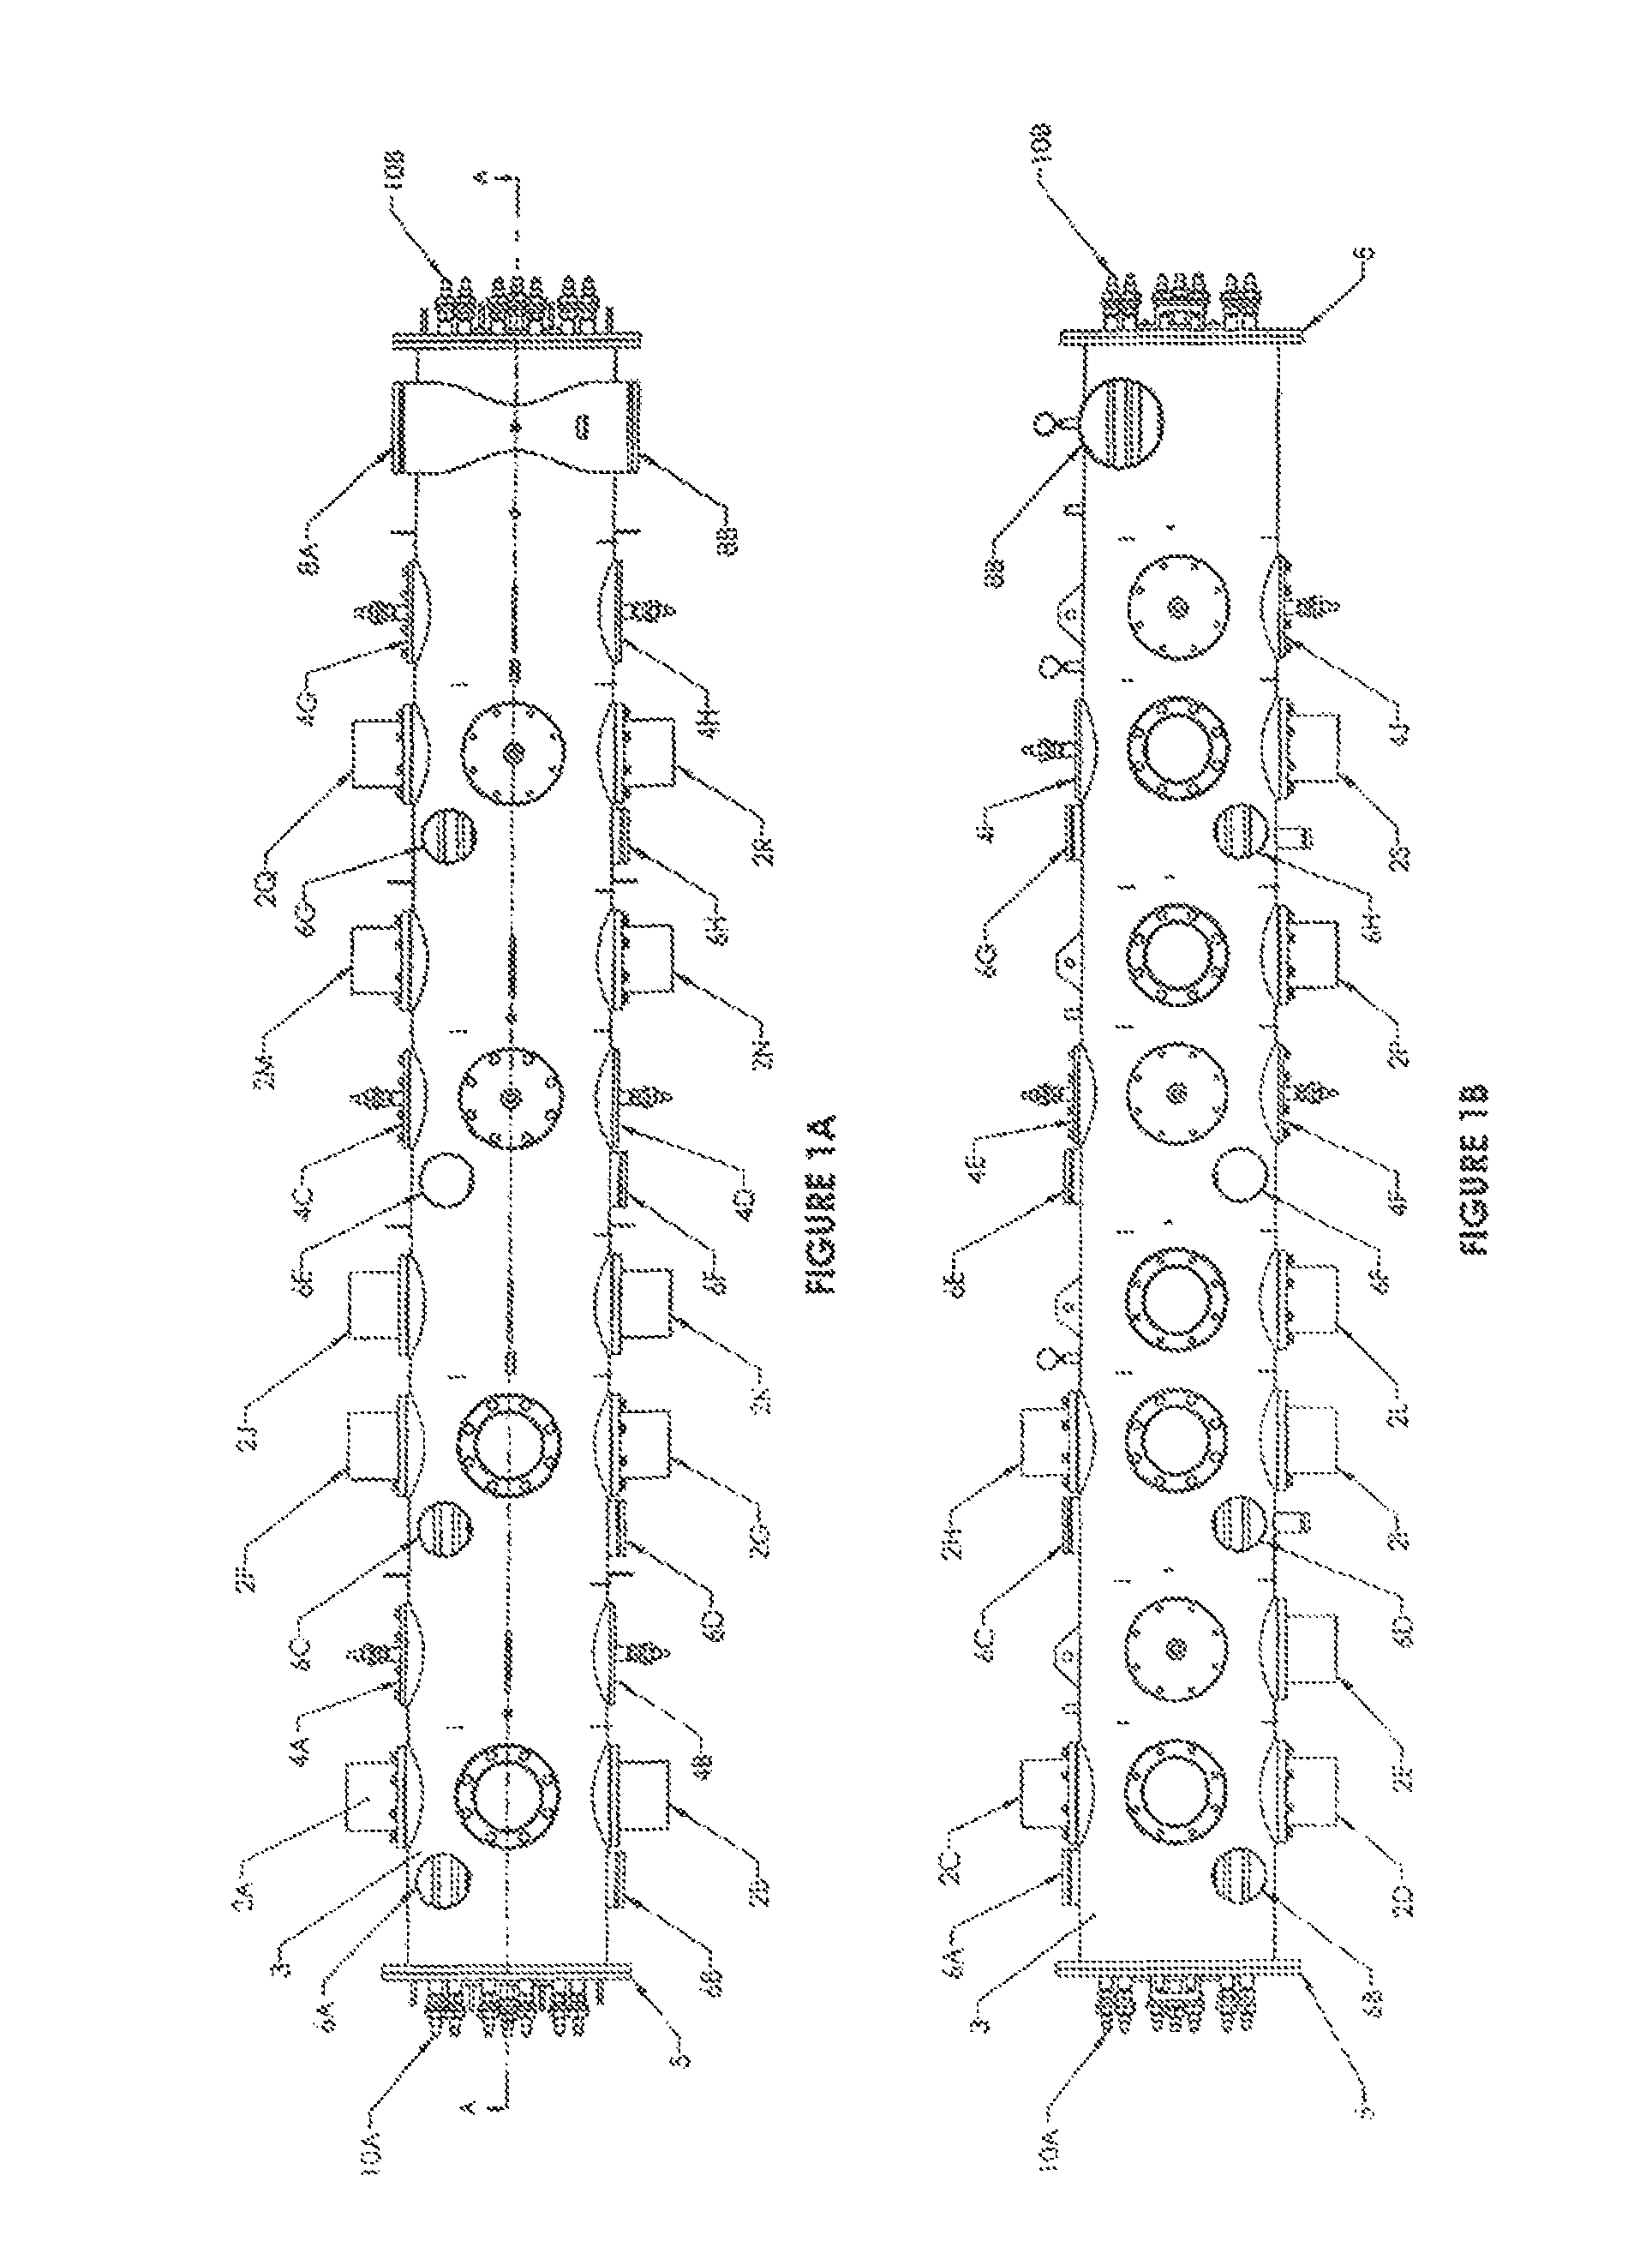 Apparatus for treating fluids